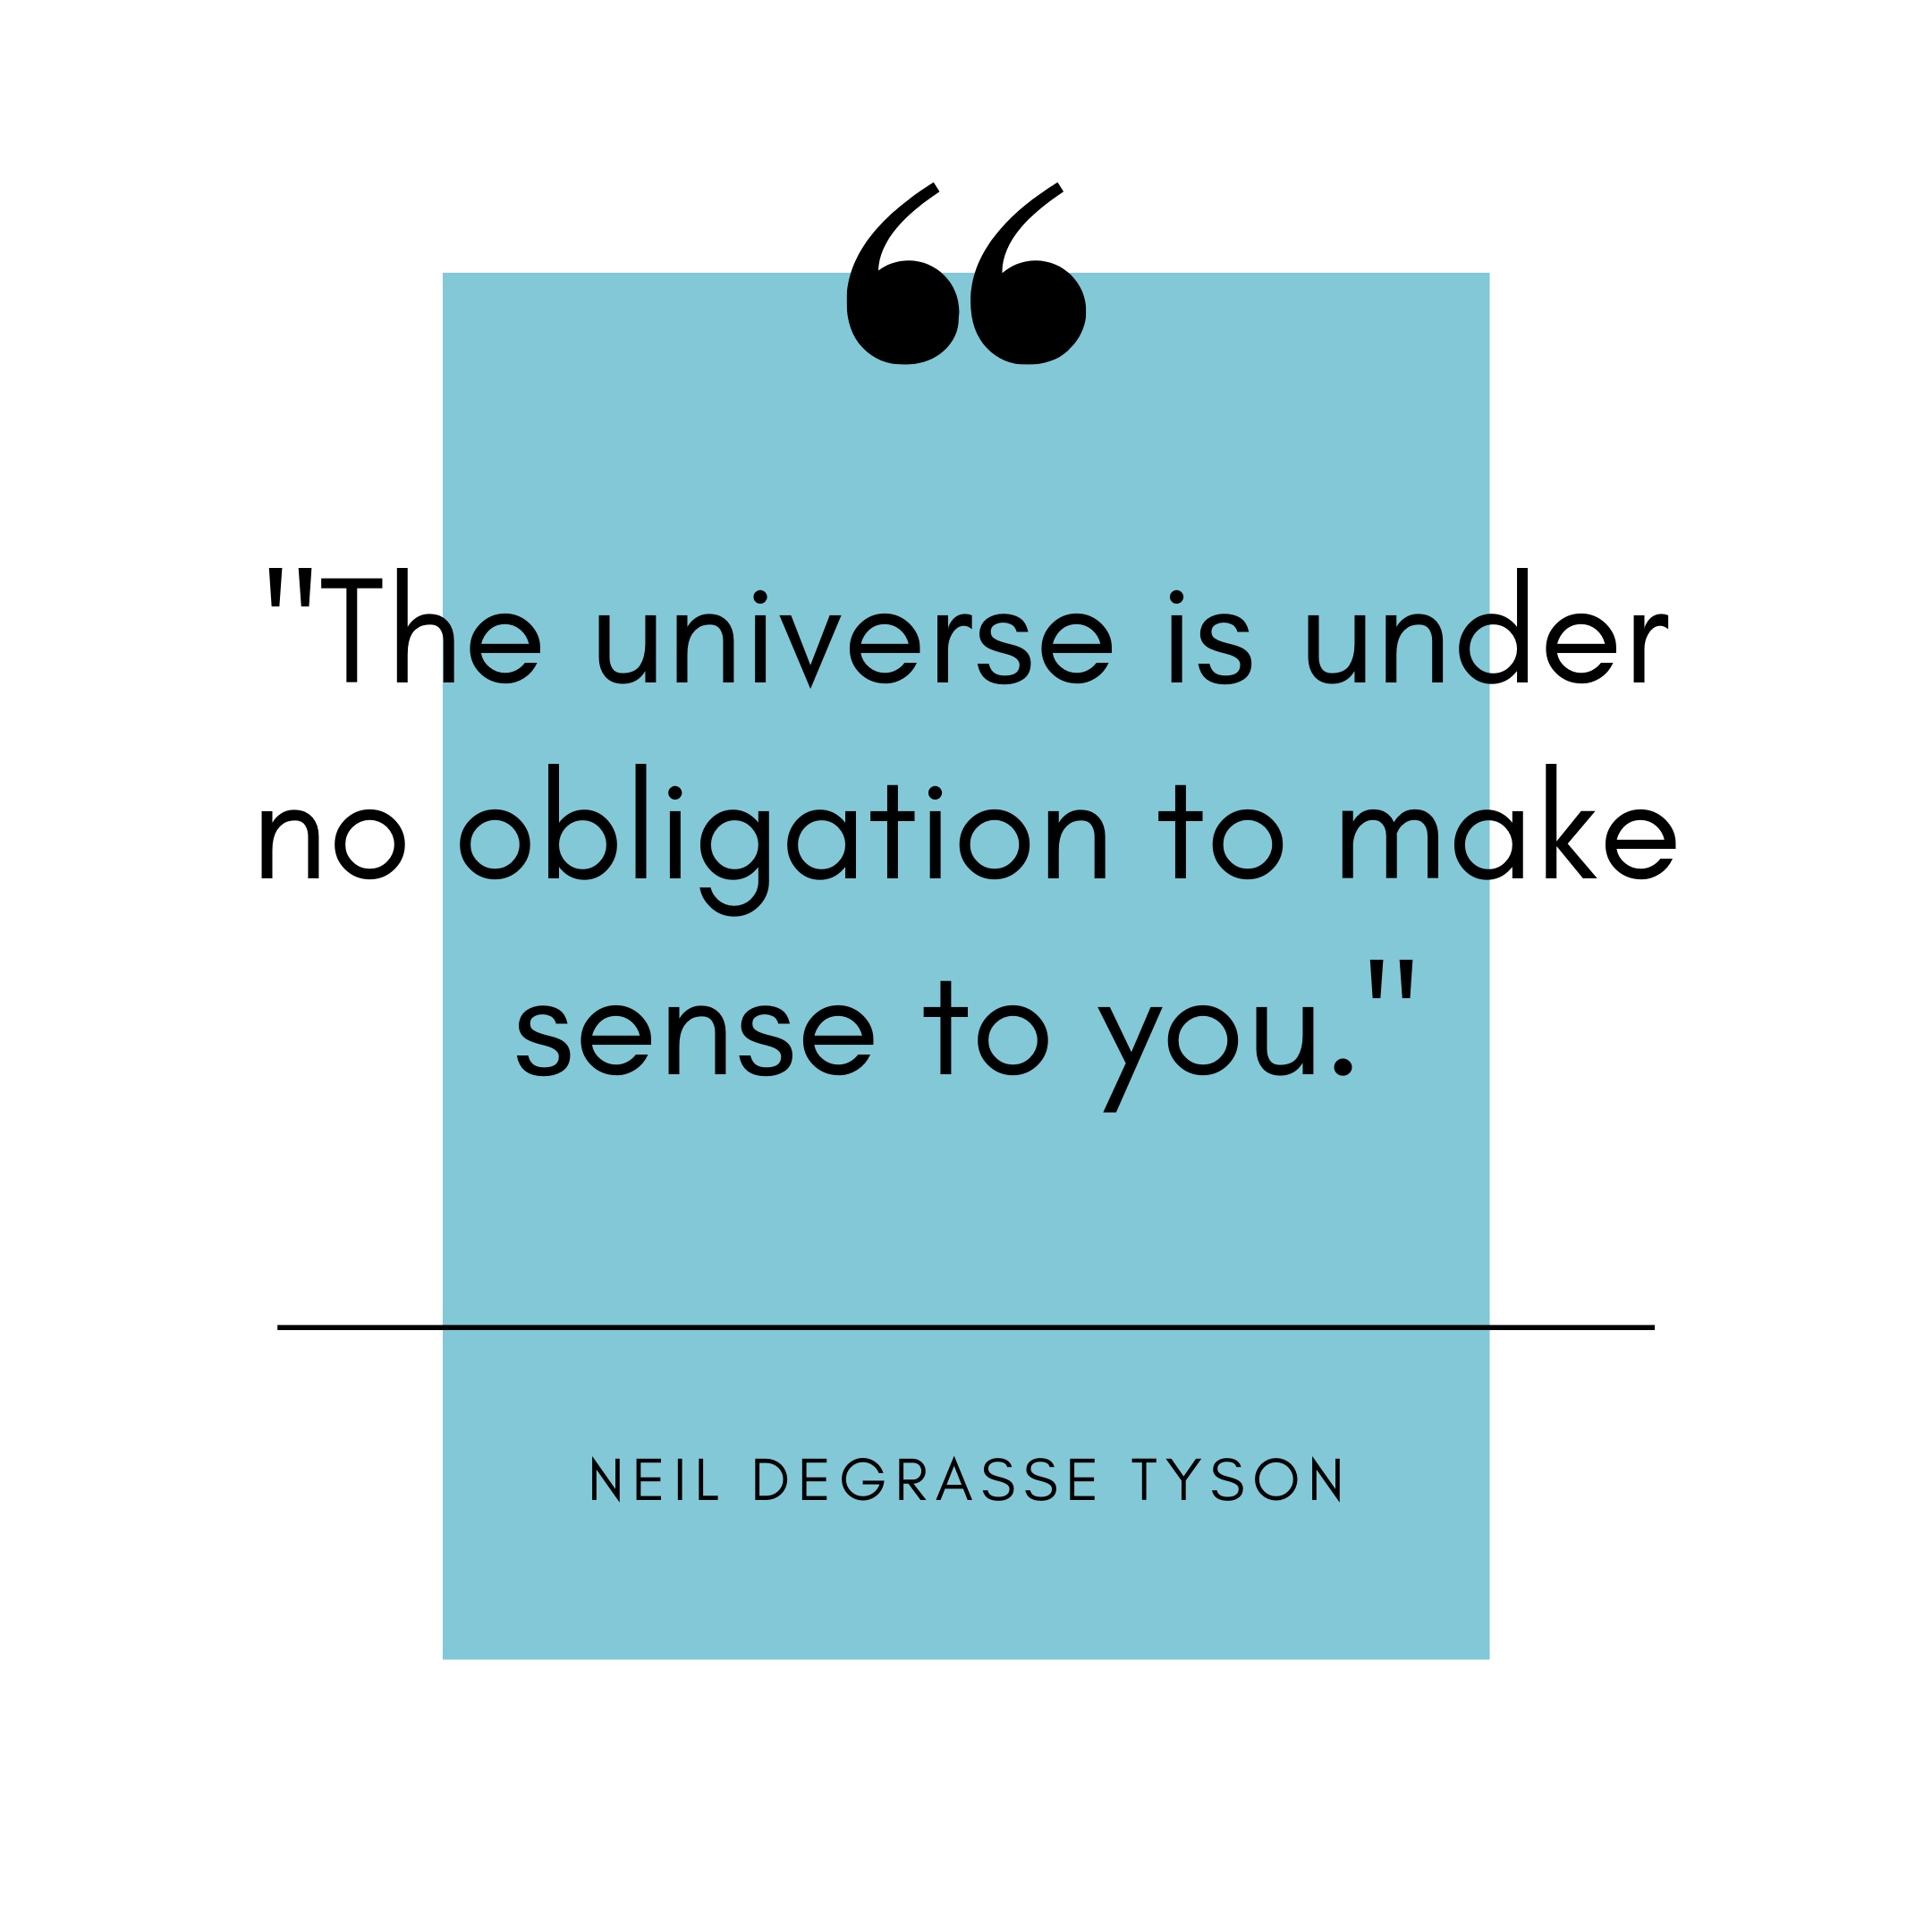 "The universe is under no obligation to make sense to you" Neil deGrasse Tyson